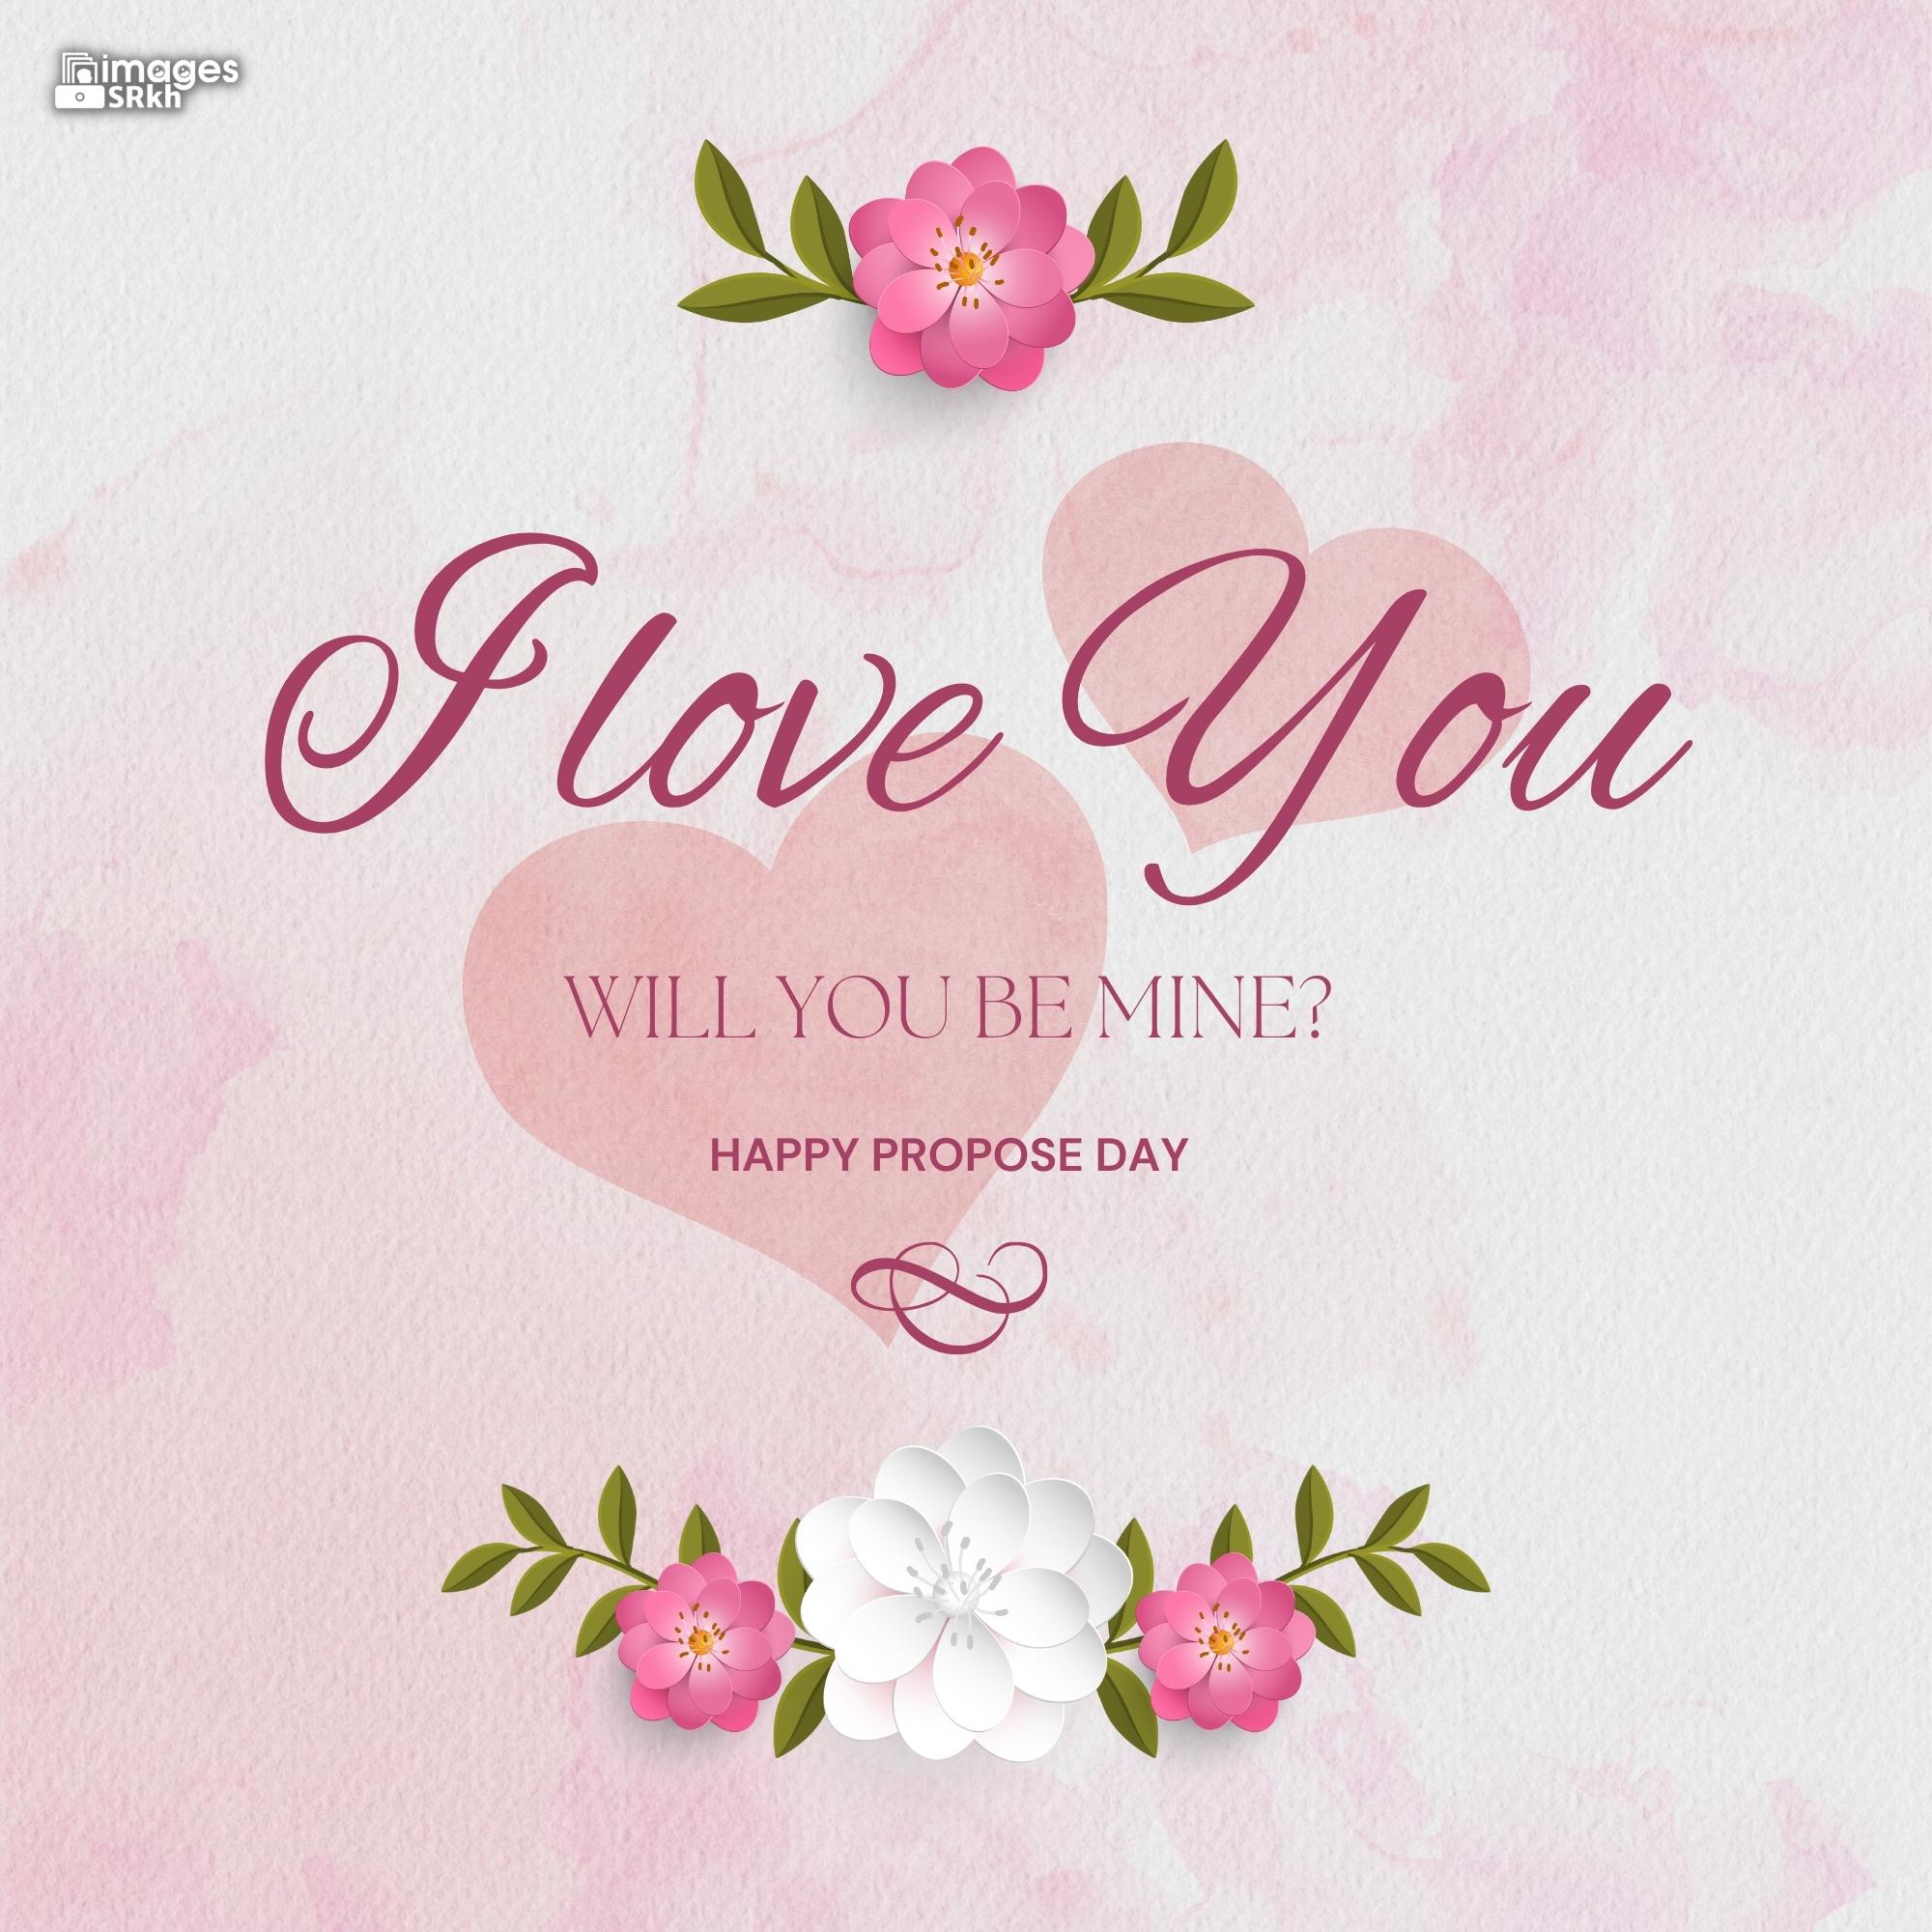 Happy Propose Day Images | 452 | I love you will you be mine